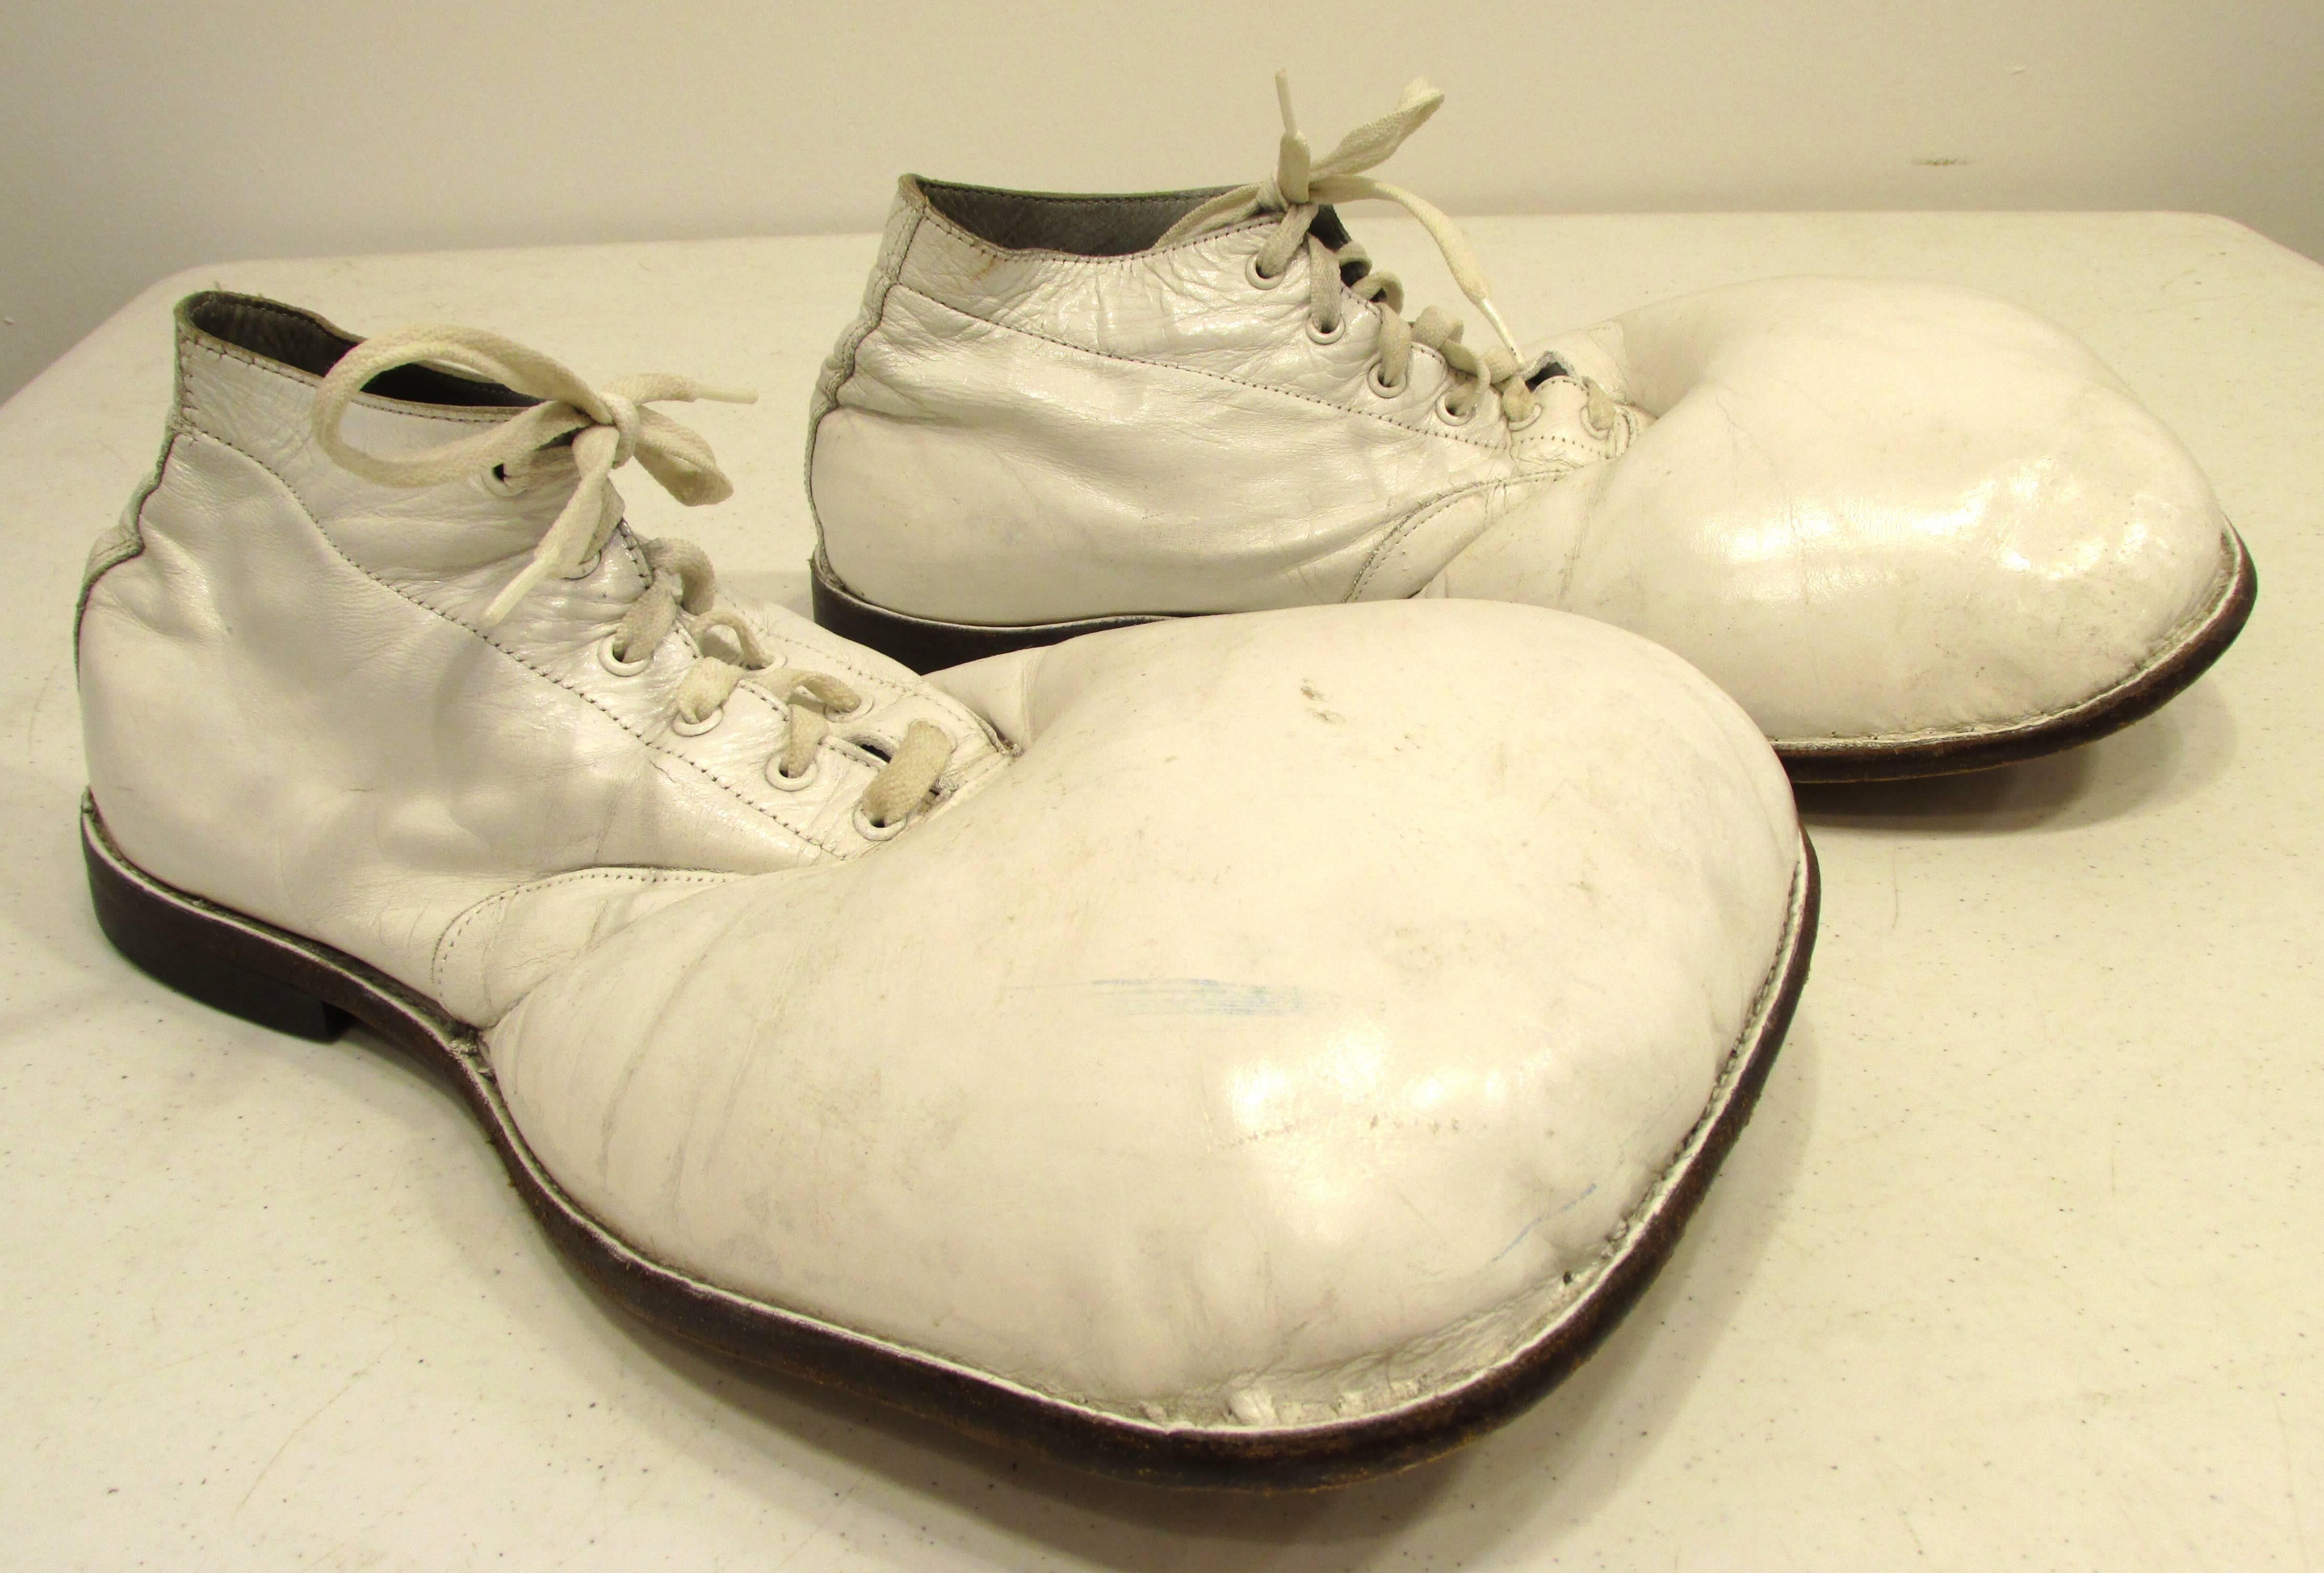 Pair of white formal clown shoes from my clown shoe collection.